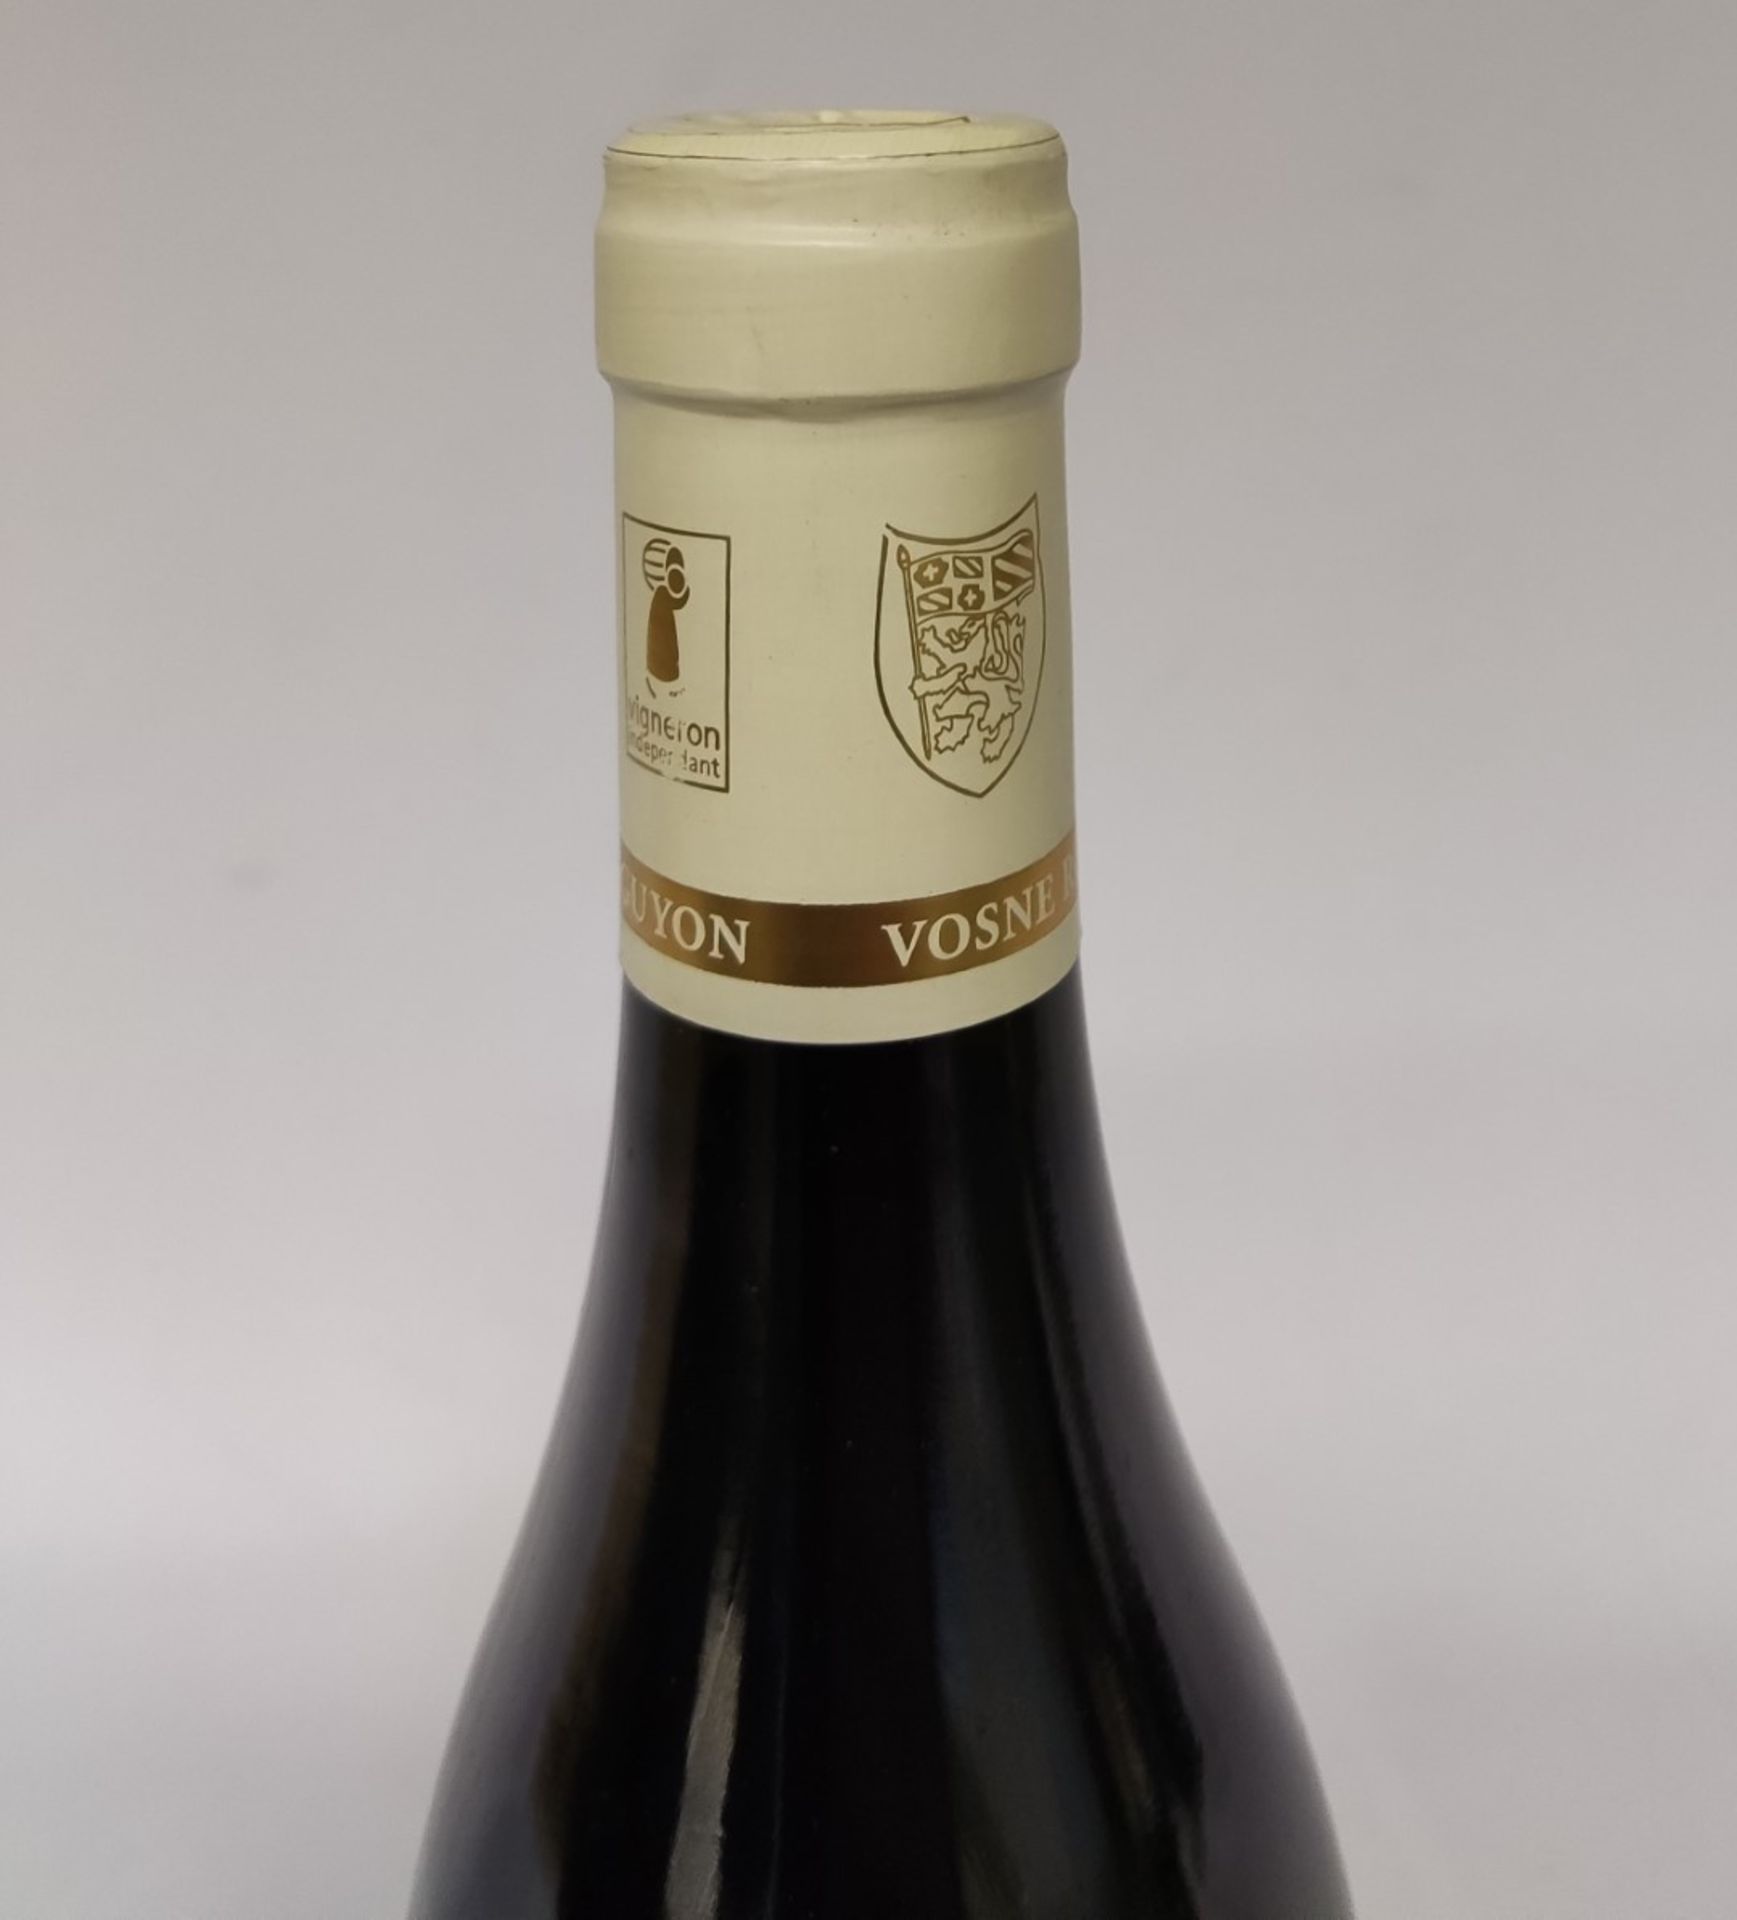 1 x Bottle of 2012 Clos Vougeot Grand Cru Domain Guyon Red Wine - RRP £180 - Image 6 of 8